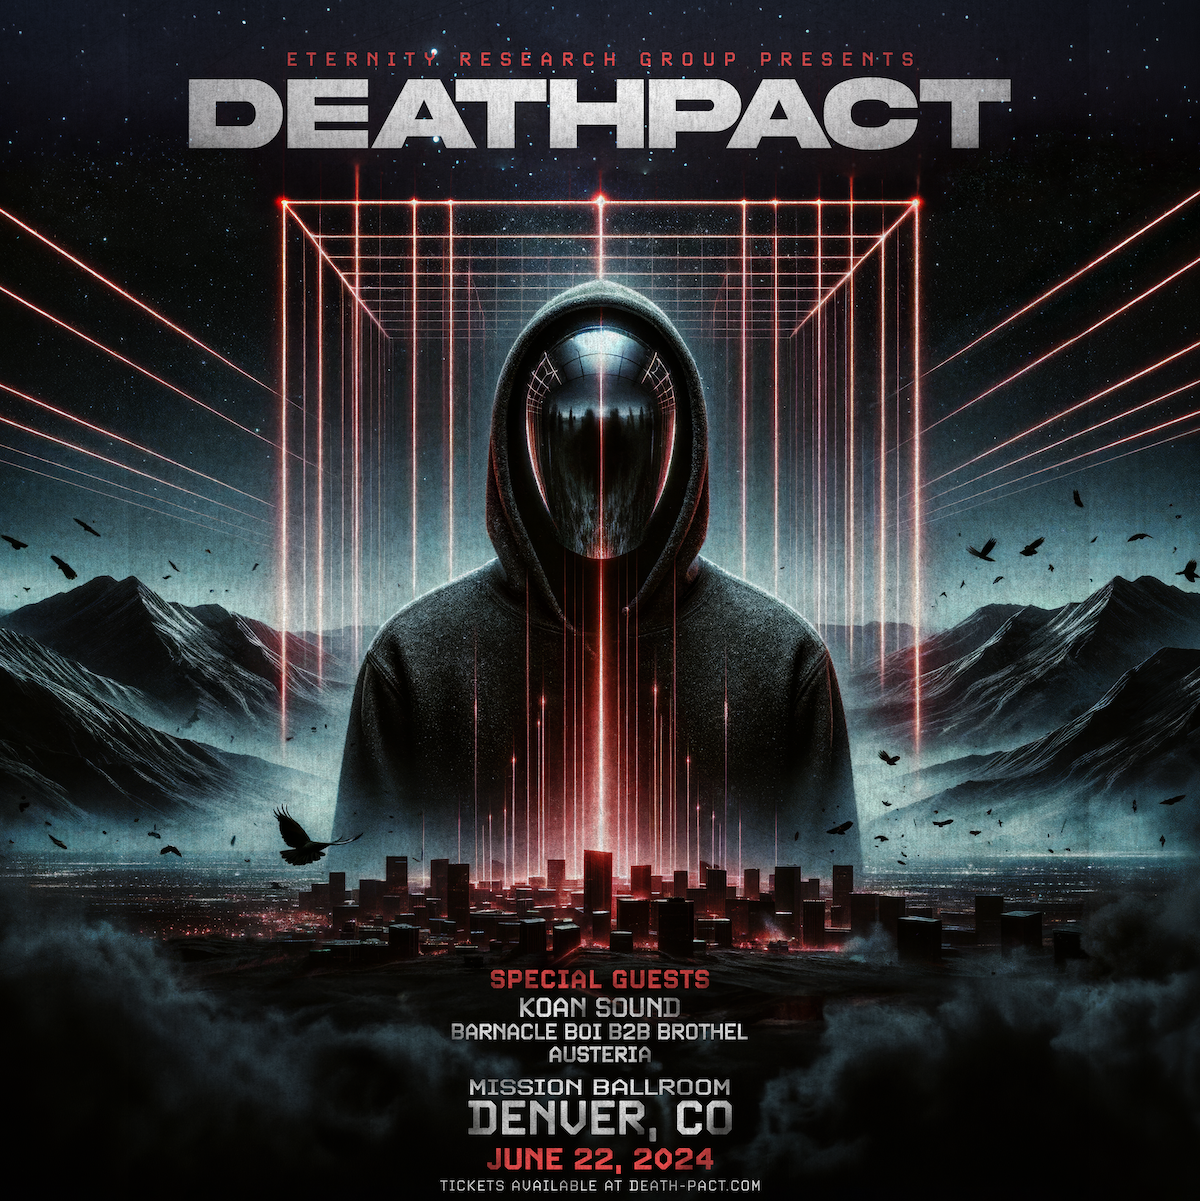 Deathpact Announces Supporting Acts For Headline Show On June 22 At Mission Ballroom In Denver